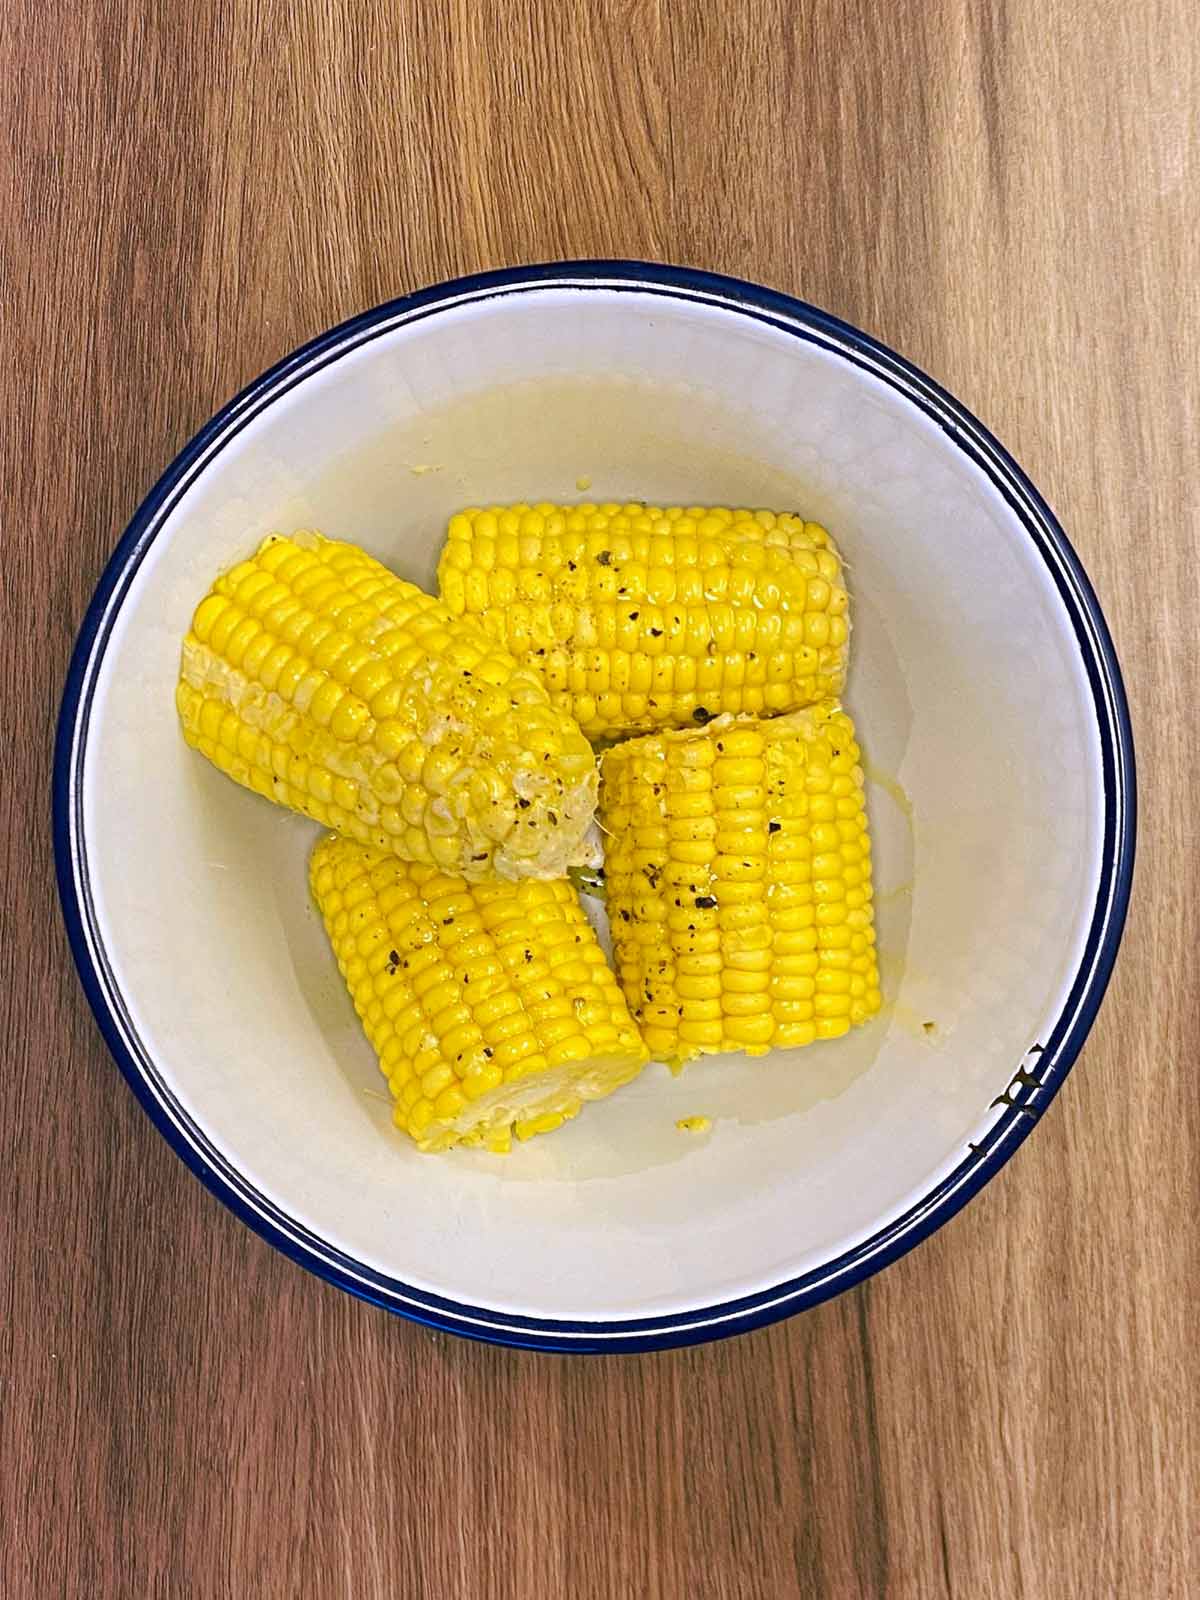 Four corn cobs in a bowl covered in oil and seasoning.